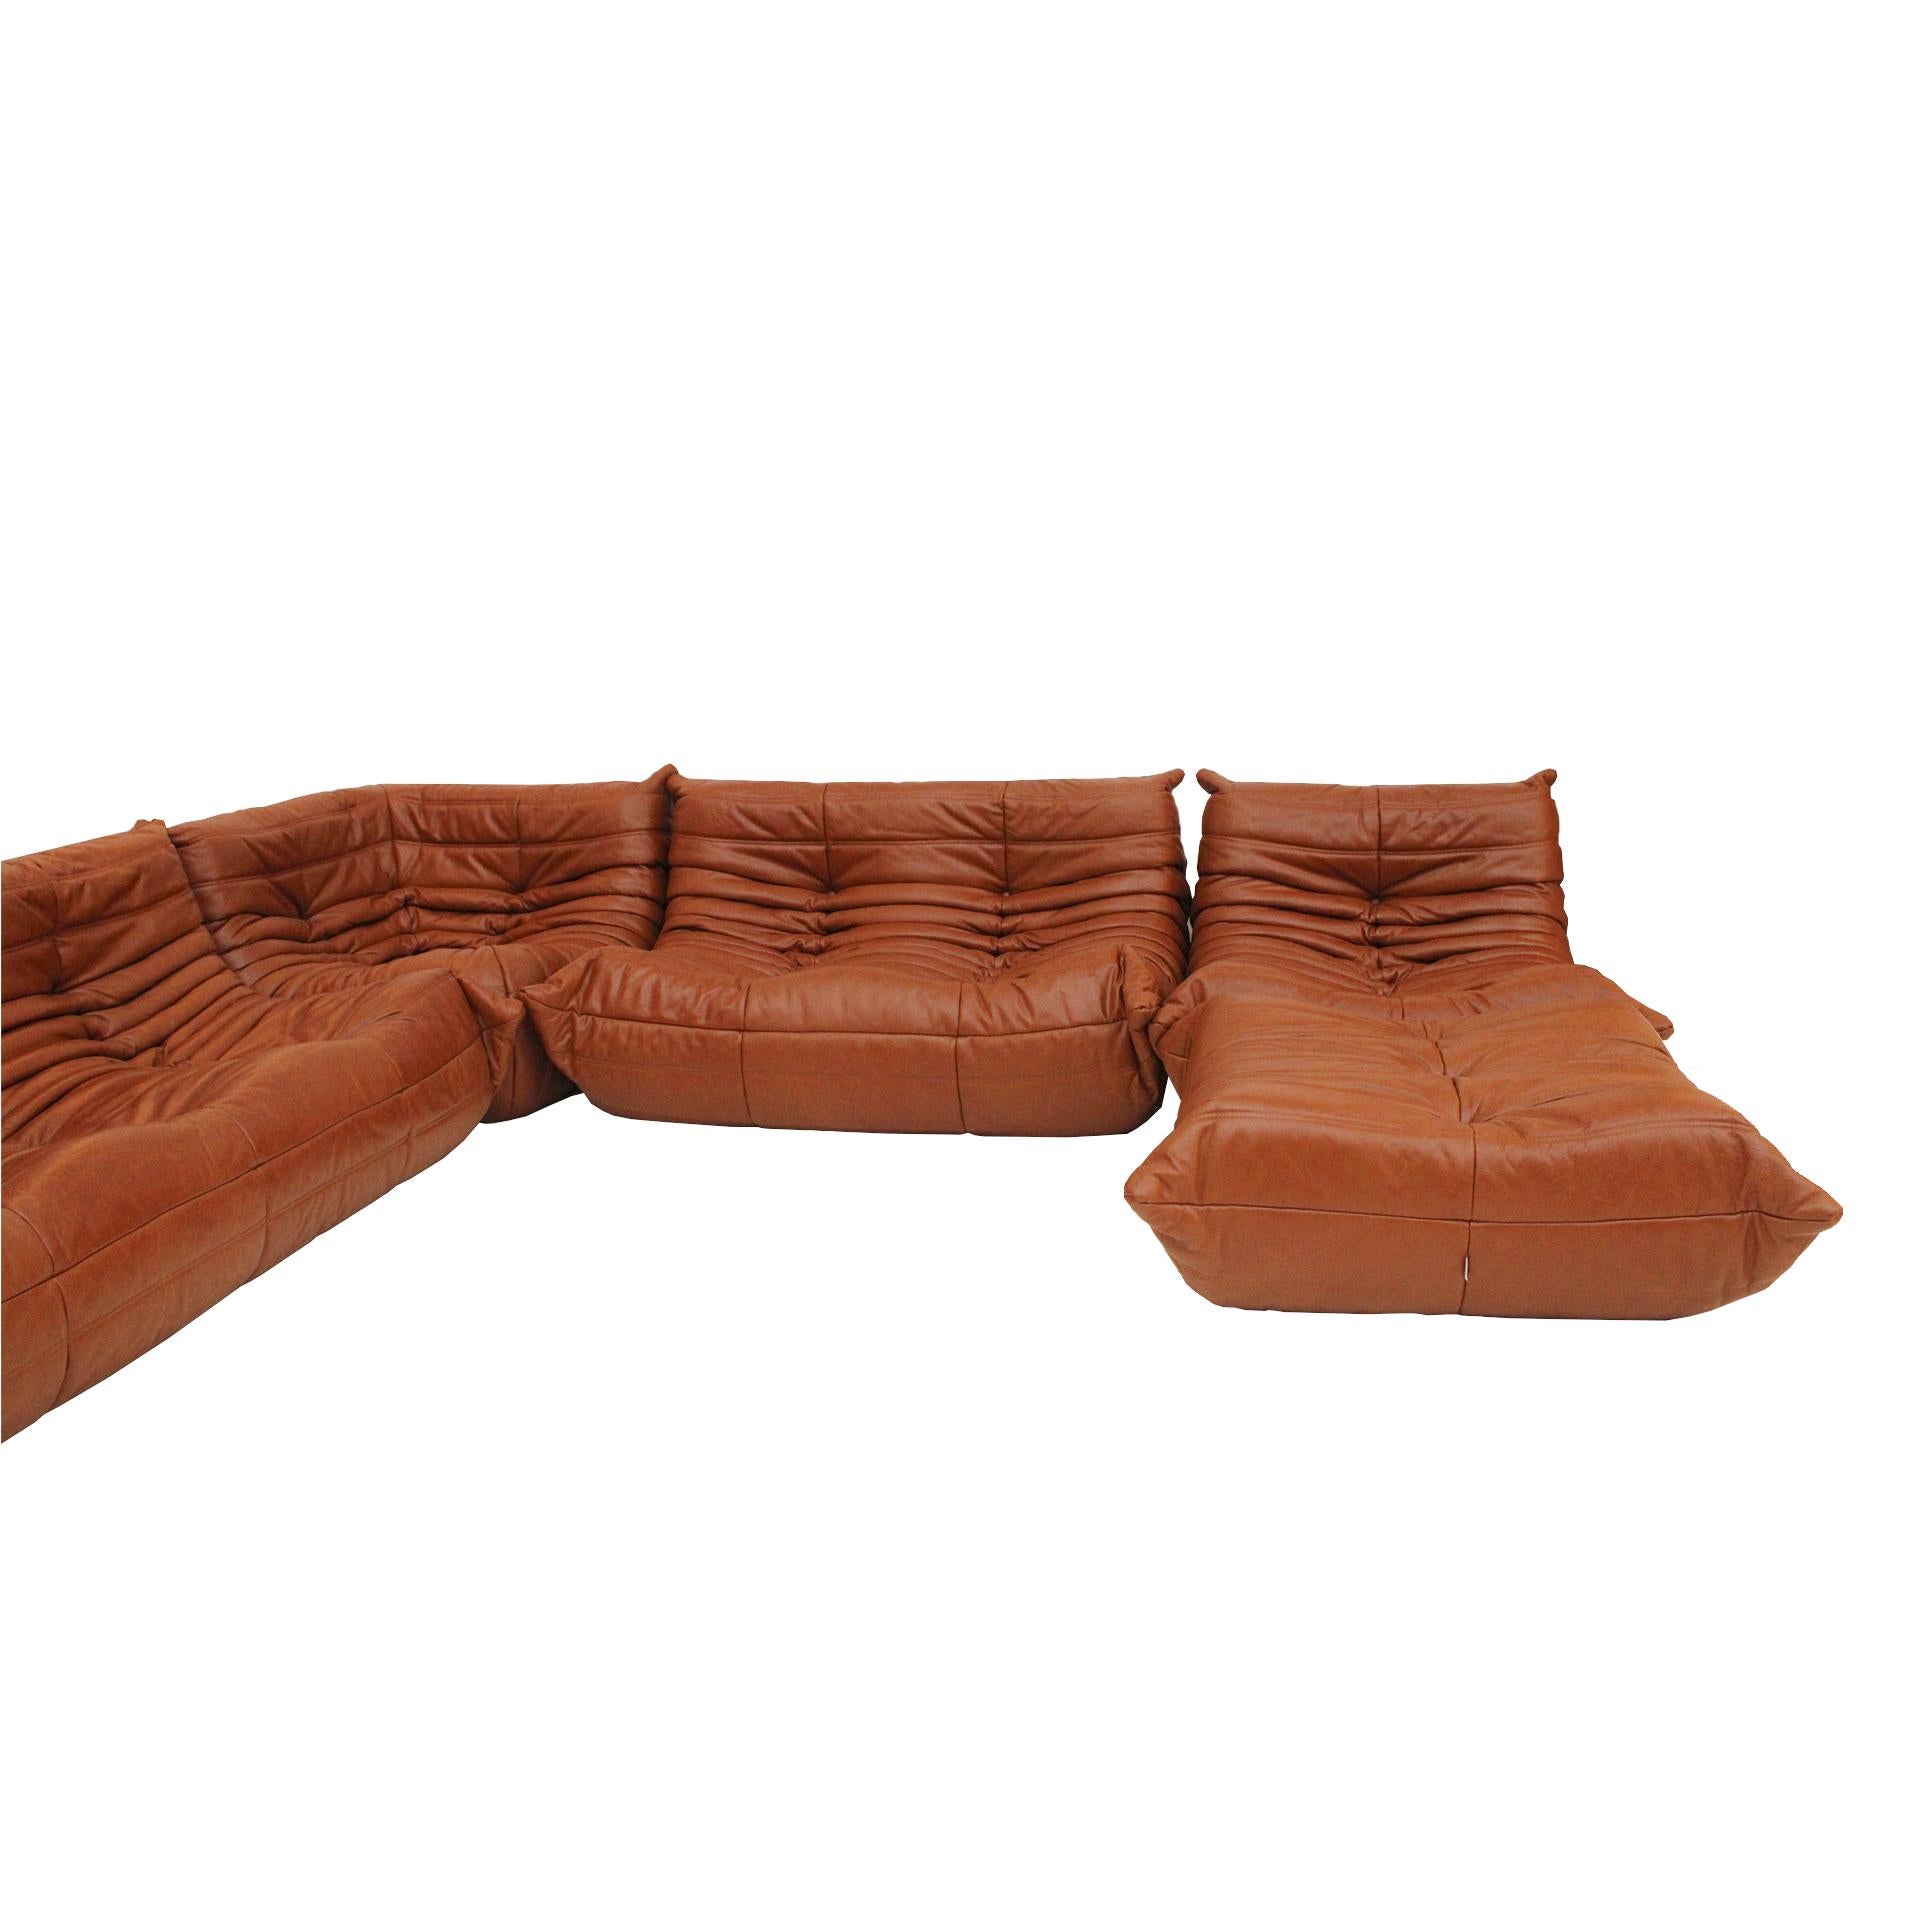 Set mod. Togo designed by Michel Ducaroy for Ligne Roset. Upholstered in brown leather. France 70's.

Double armchair size: W 120 x D 100 x H 35 / 70 cm
Corner sofa: W 100 x D 100 x H 35 / 70 cm (1 item) D 100 x H 35 / 70 cm
Individual armchair